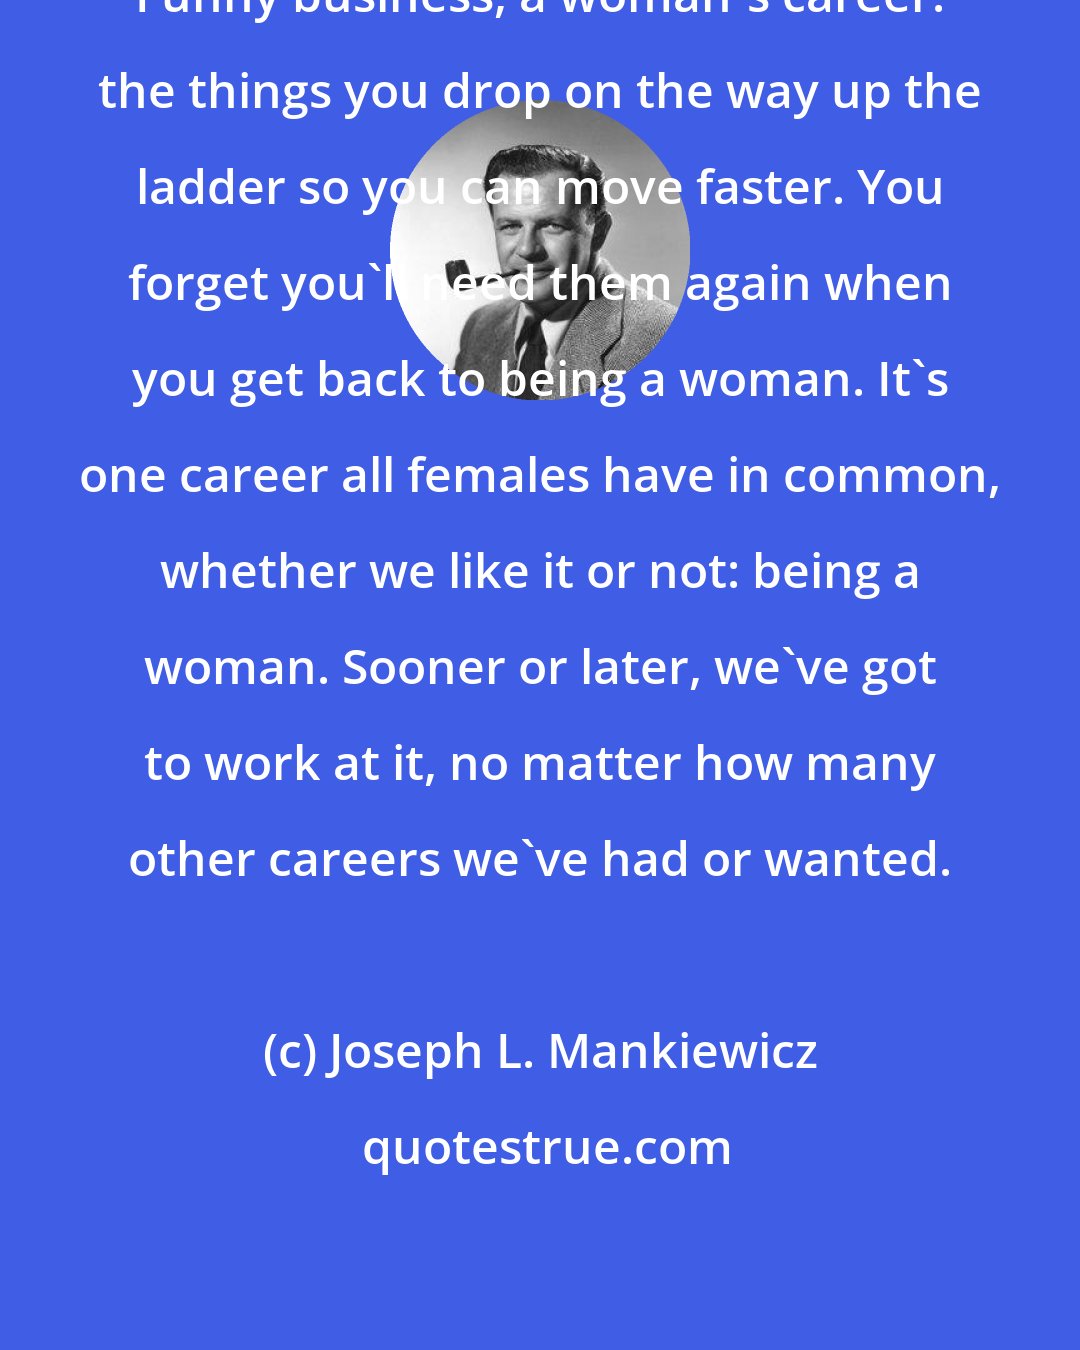 Joseph L. Mankiewicz: Funny business, a woman's career: the things you drop on the way up the ladder so you can move faster. You forget you'll need them again when you get back to being a woman. It's one career all females have in common, whether we like it or not: being a woman. Sooner or later, we've got to work at it, no matter how many other careers we've had or wanted.